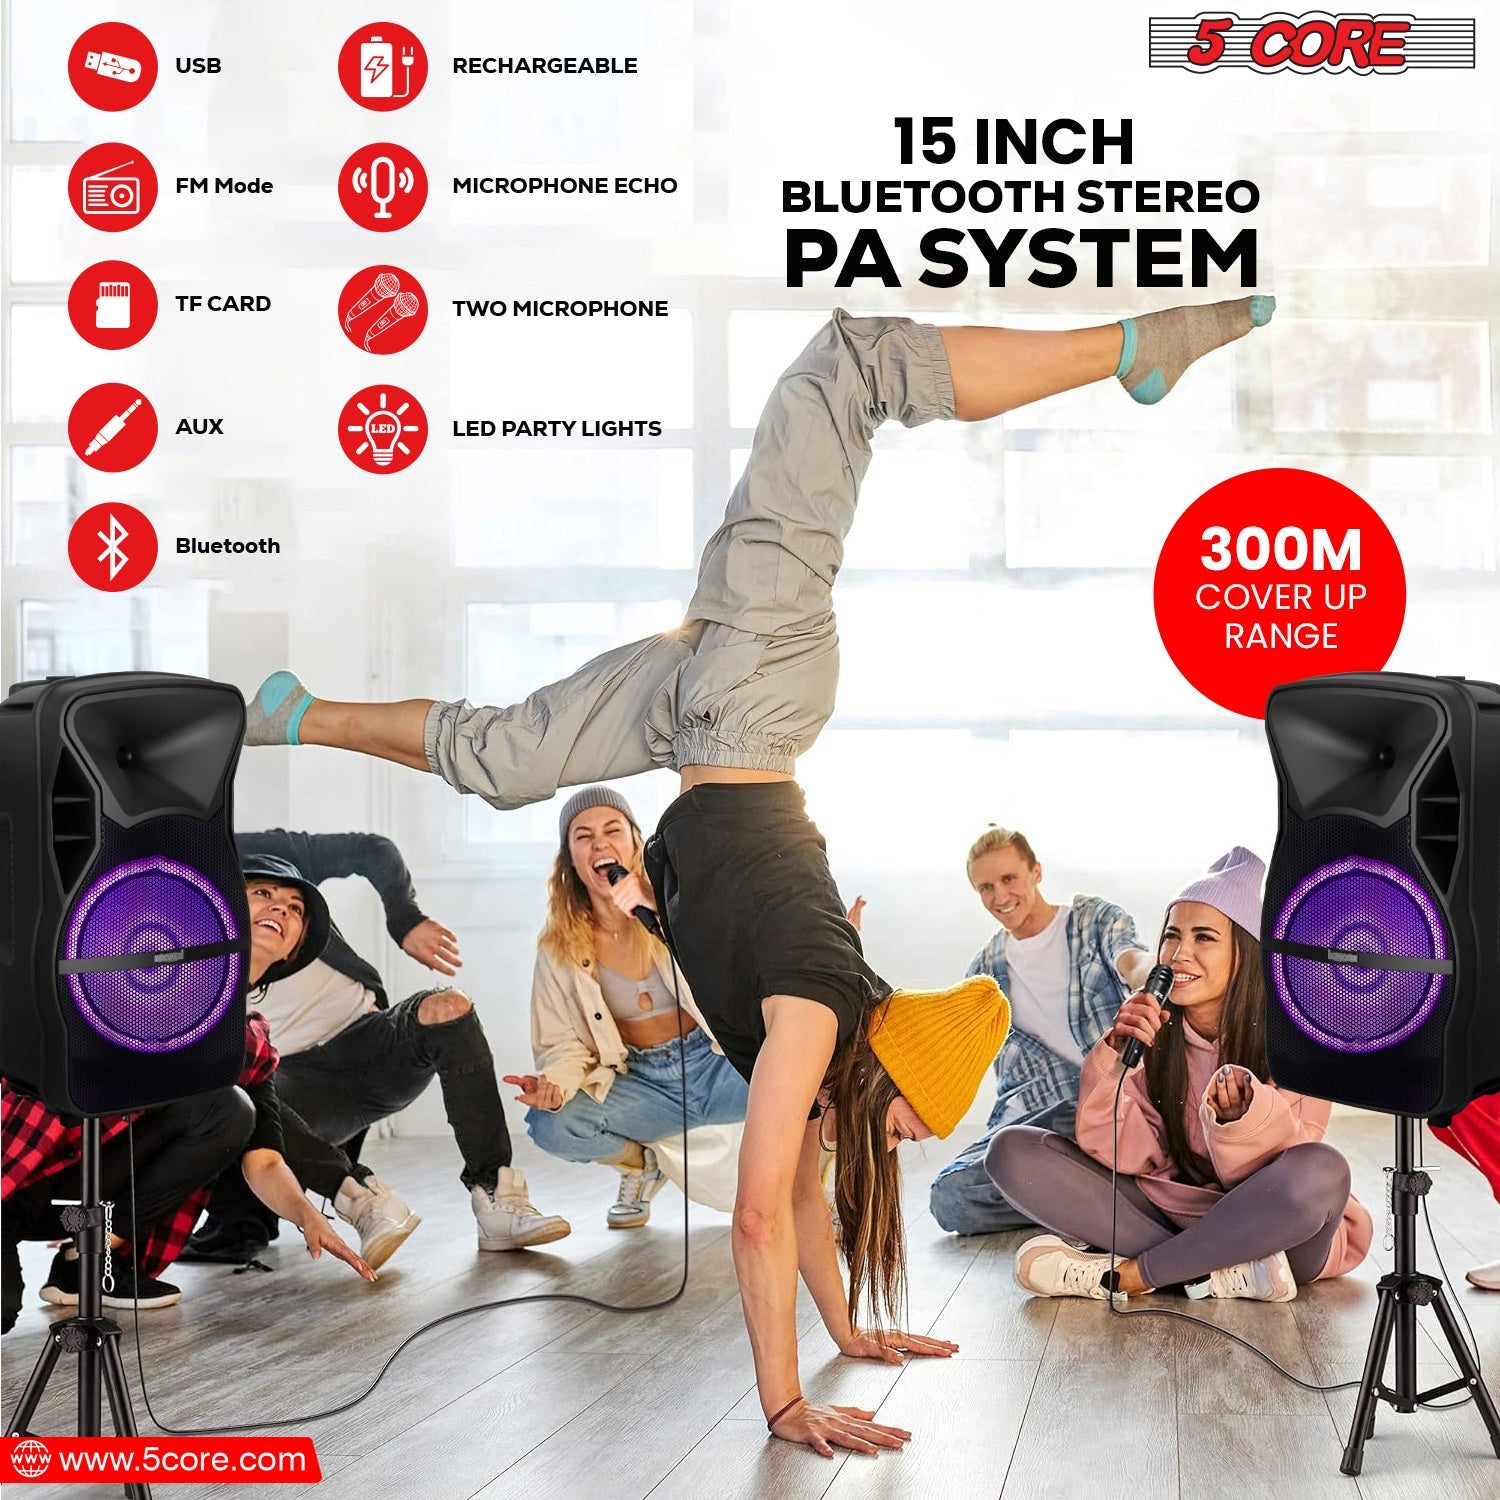 DJ Karaoke Machine by 5Core: Bluetooth-enabled, portable PA system with 2 wireless microphones for parties.